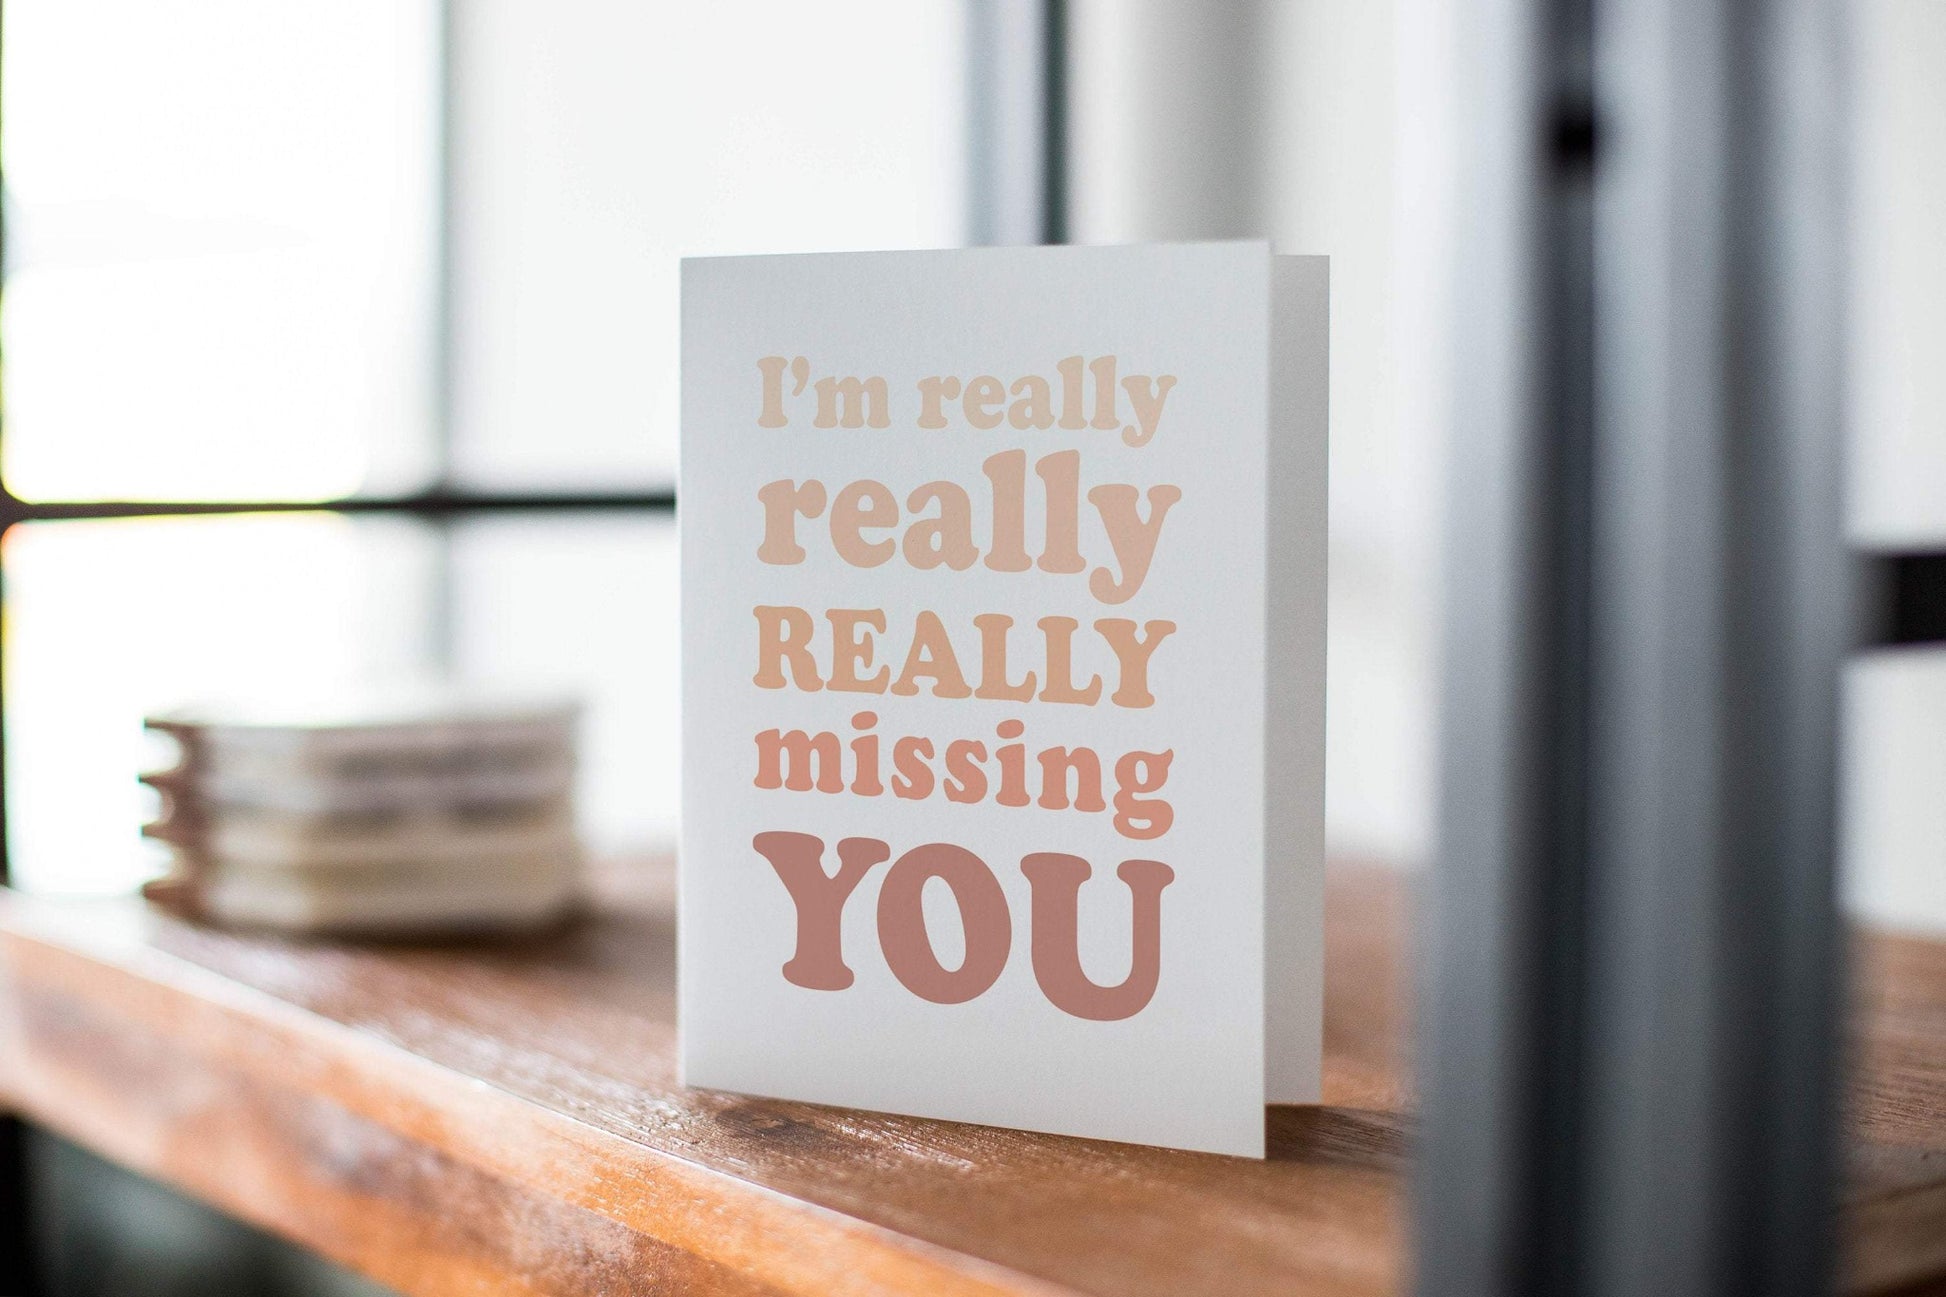 I'm Really Really Missing You - Thinking Of You Greeting Card.